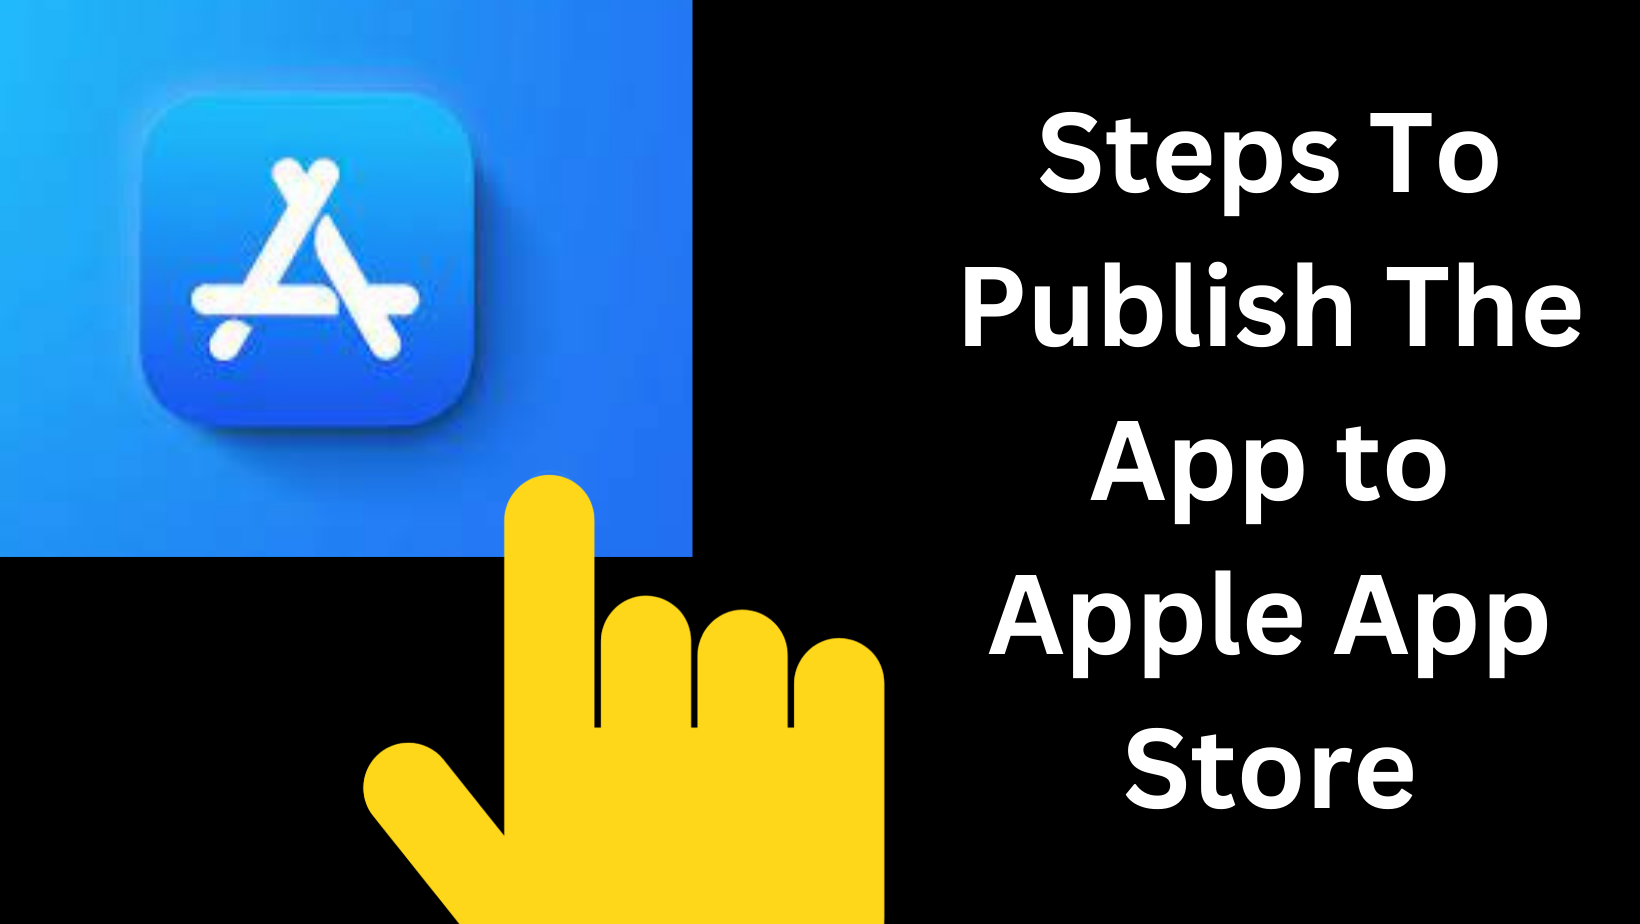 Steps To Publish The App to Apple App Store